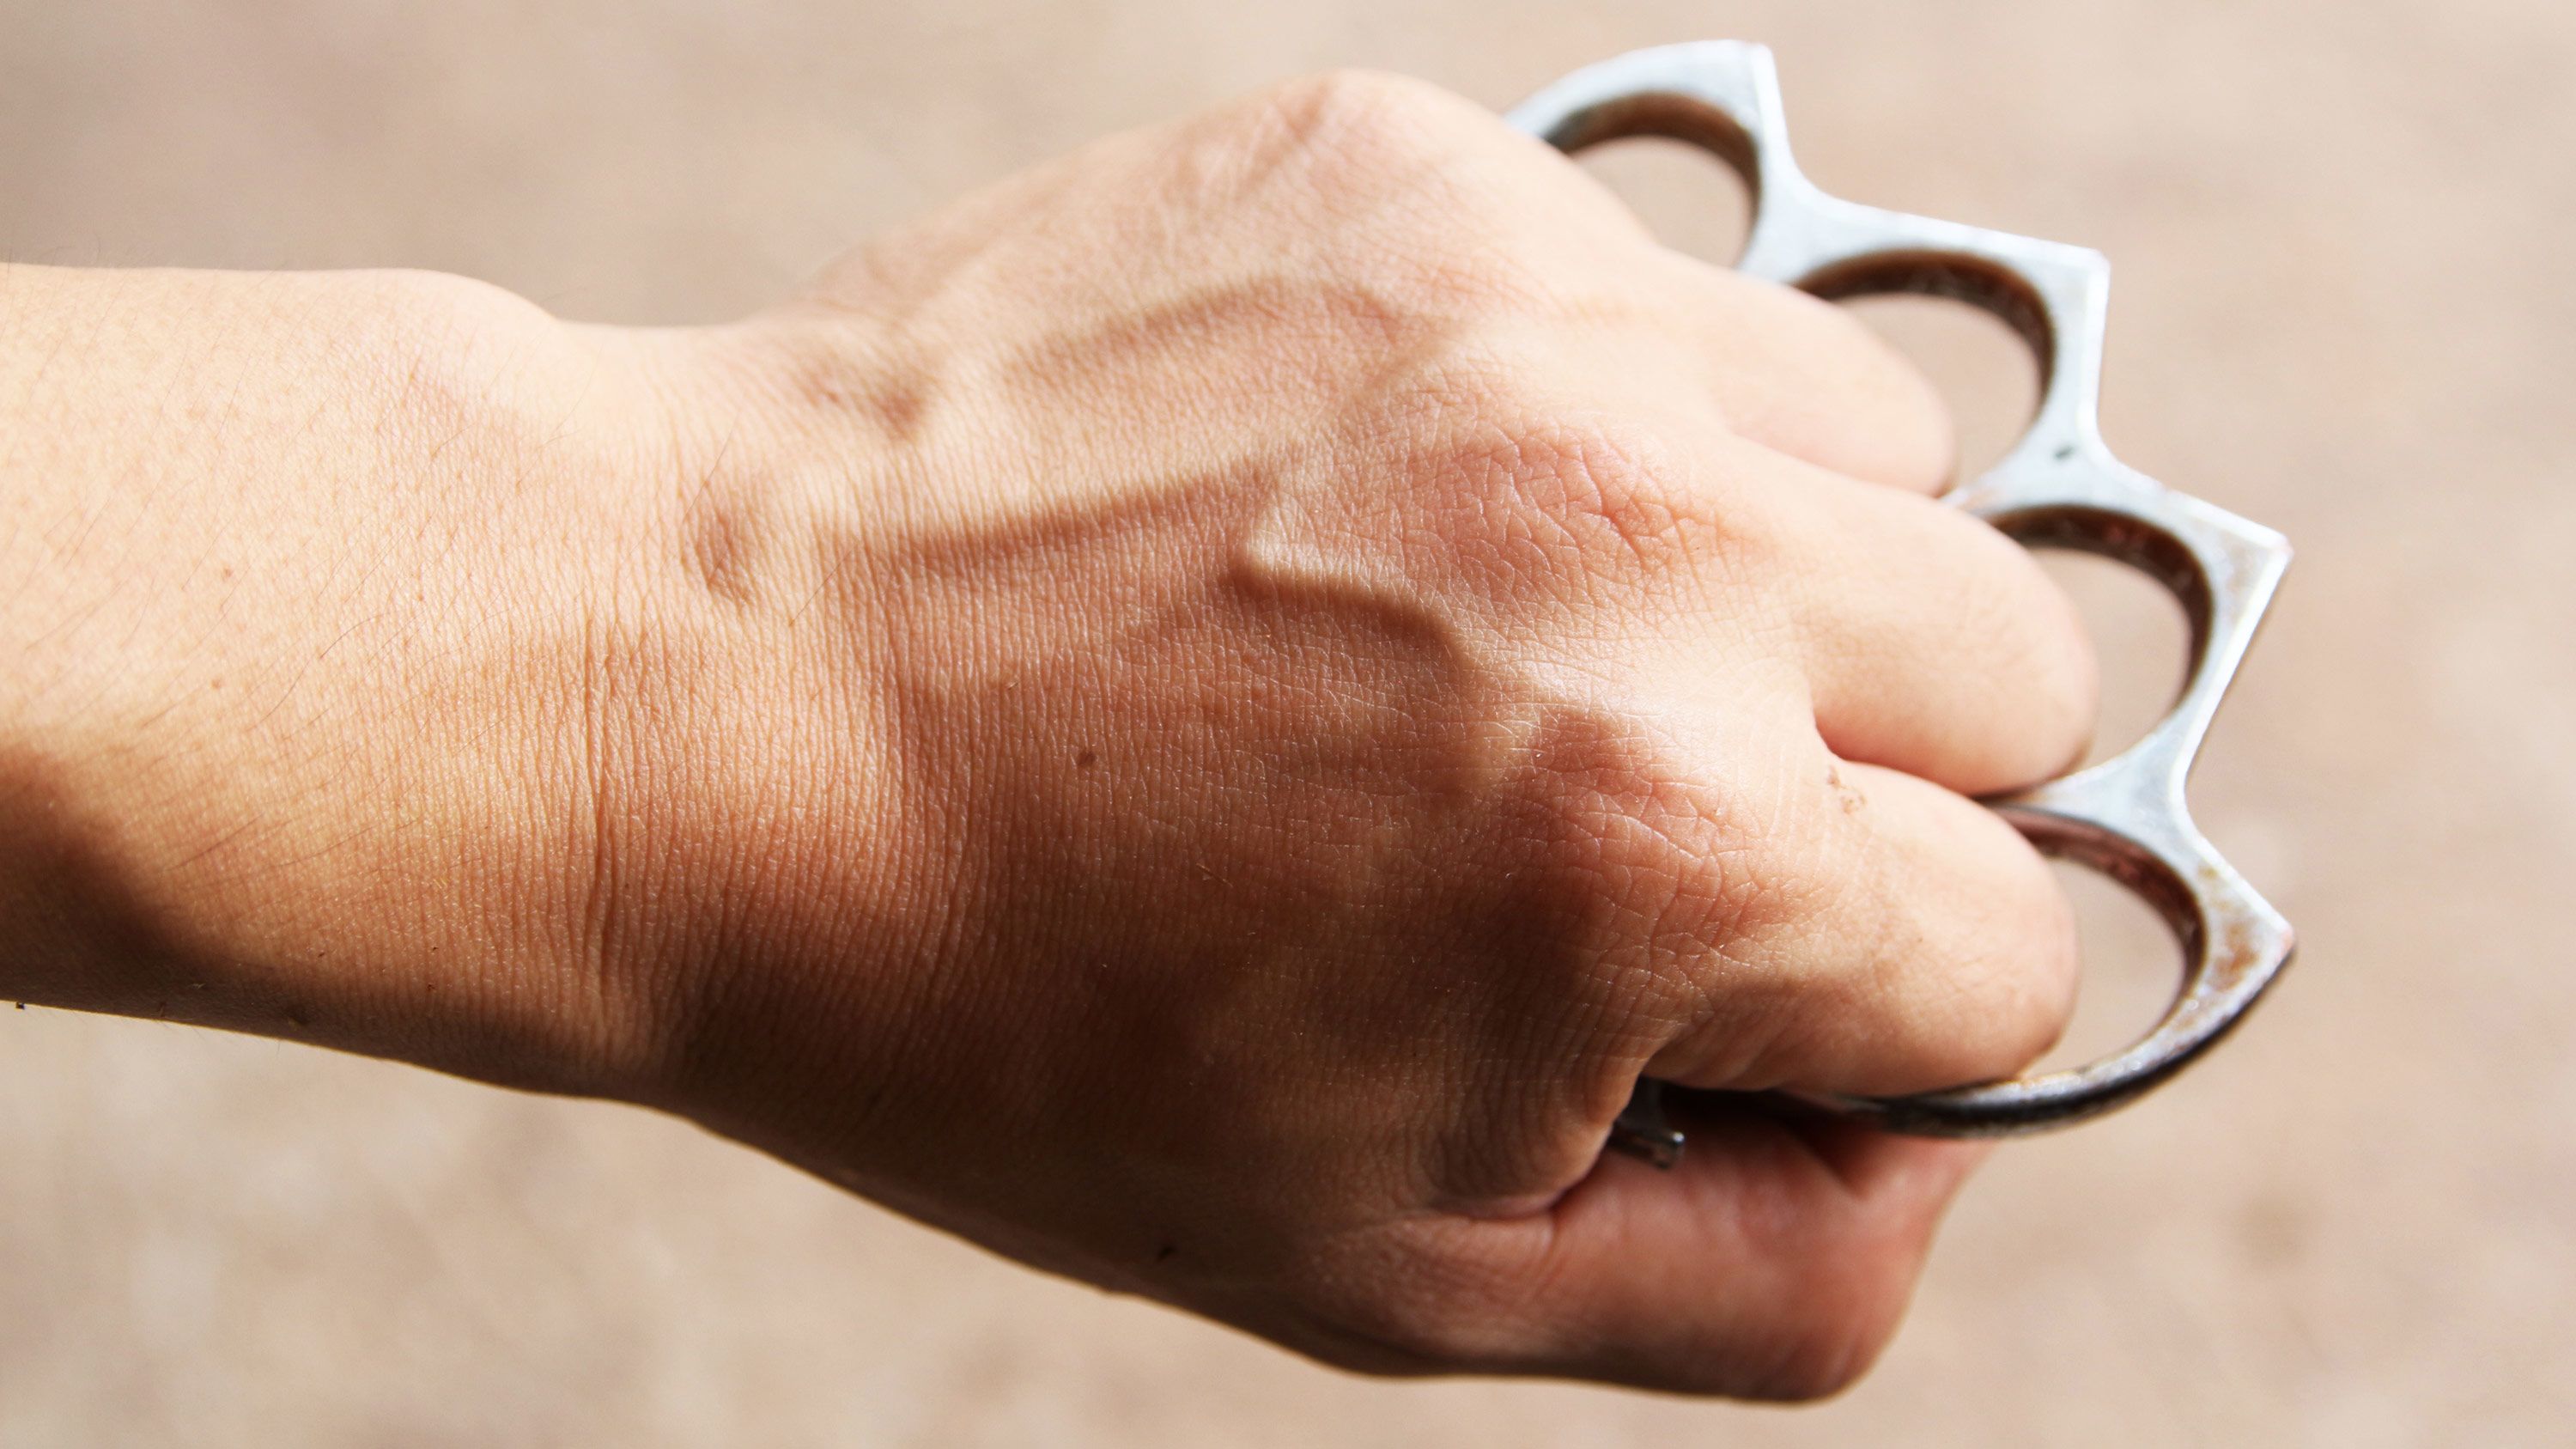 It's now legal to carry brass knuckles and clubs in Texas. Because, 'self- defense